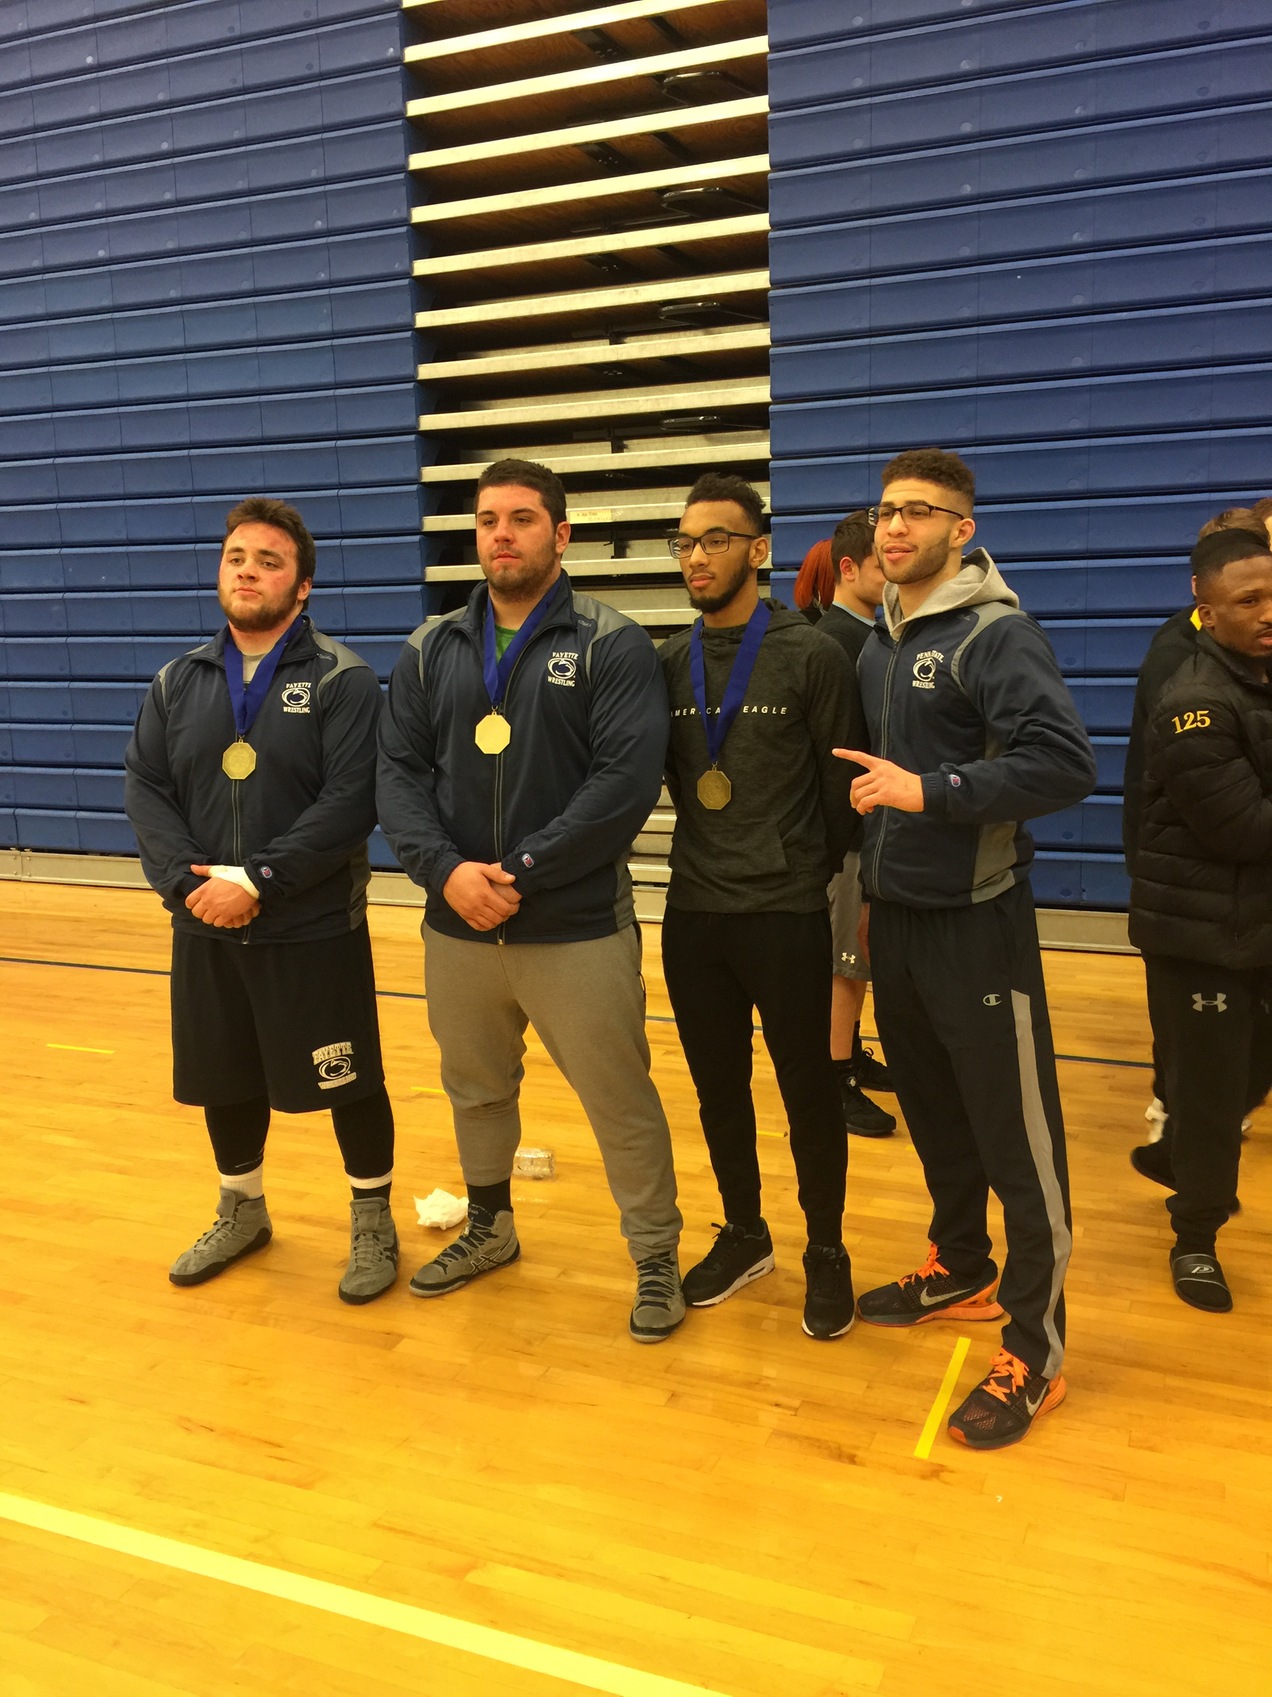 Roaring Lions have strong showing at MEC Championships